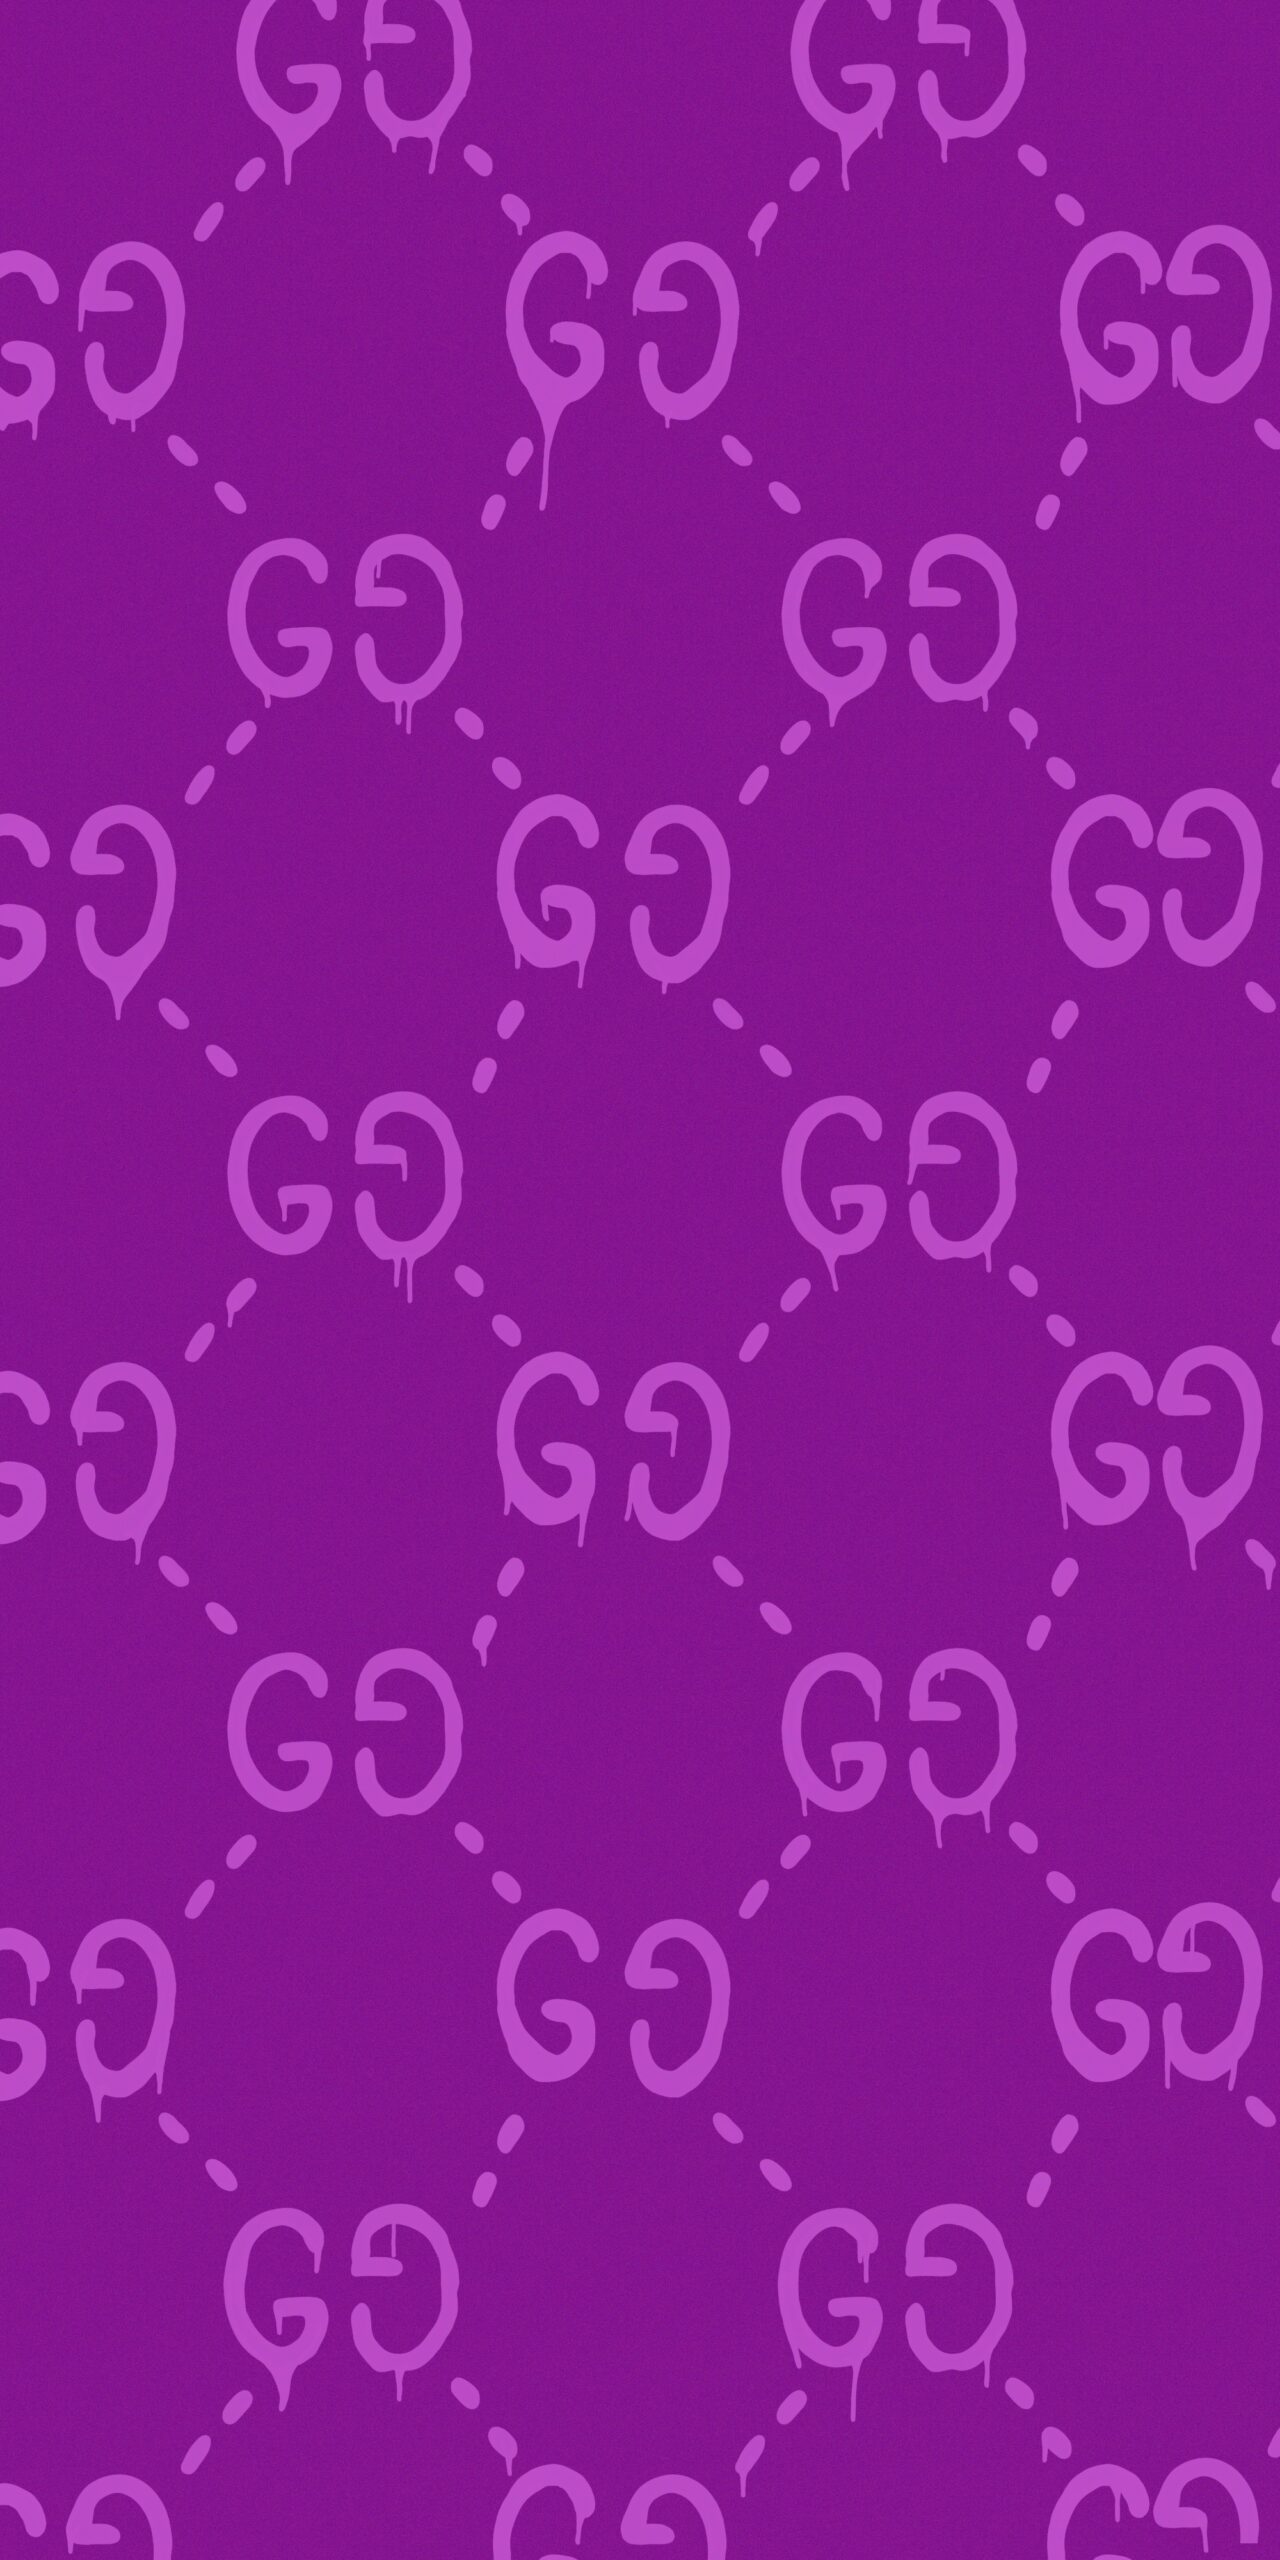 Purple Gucci Wallpapers